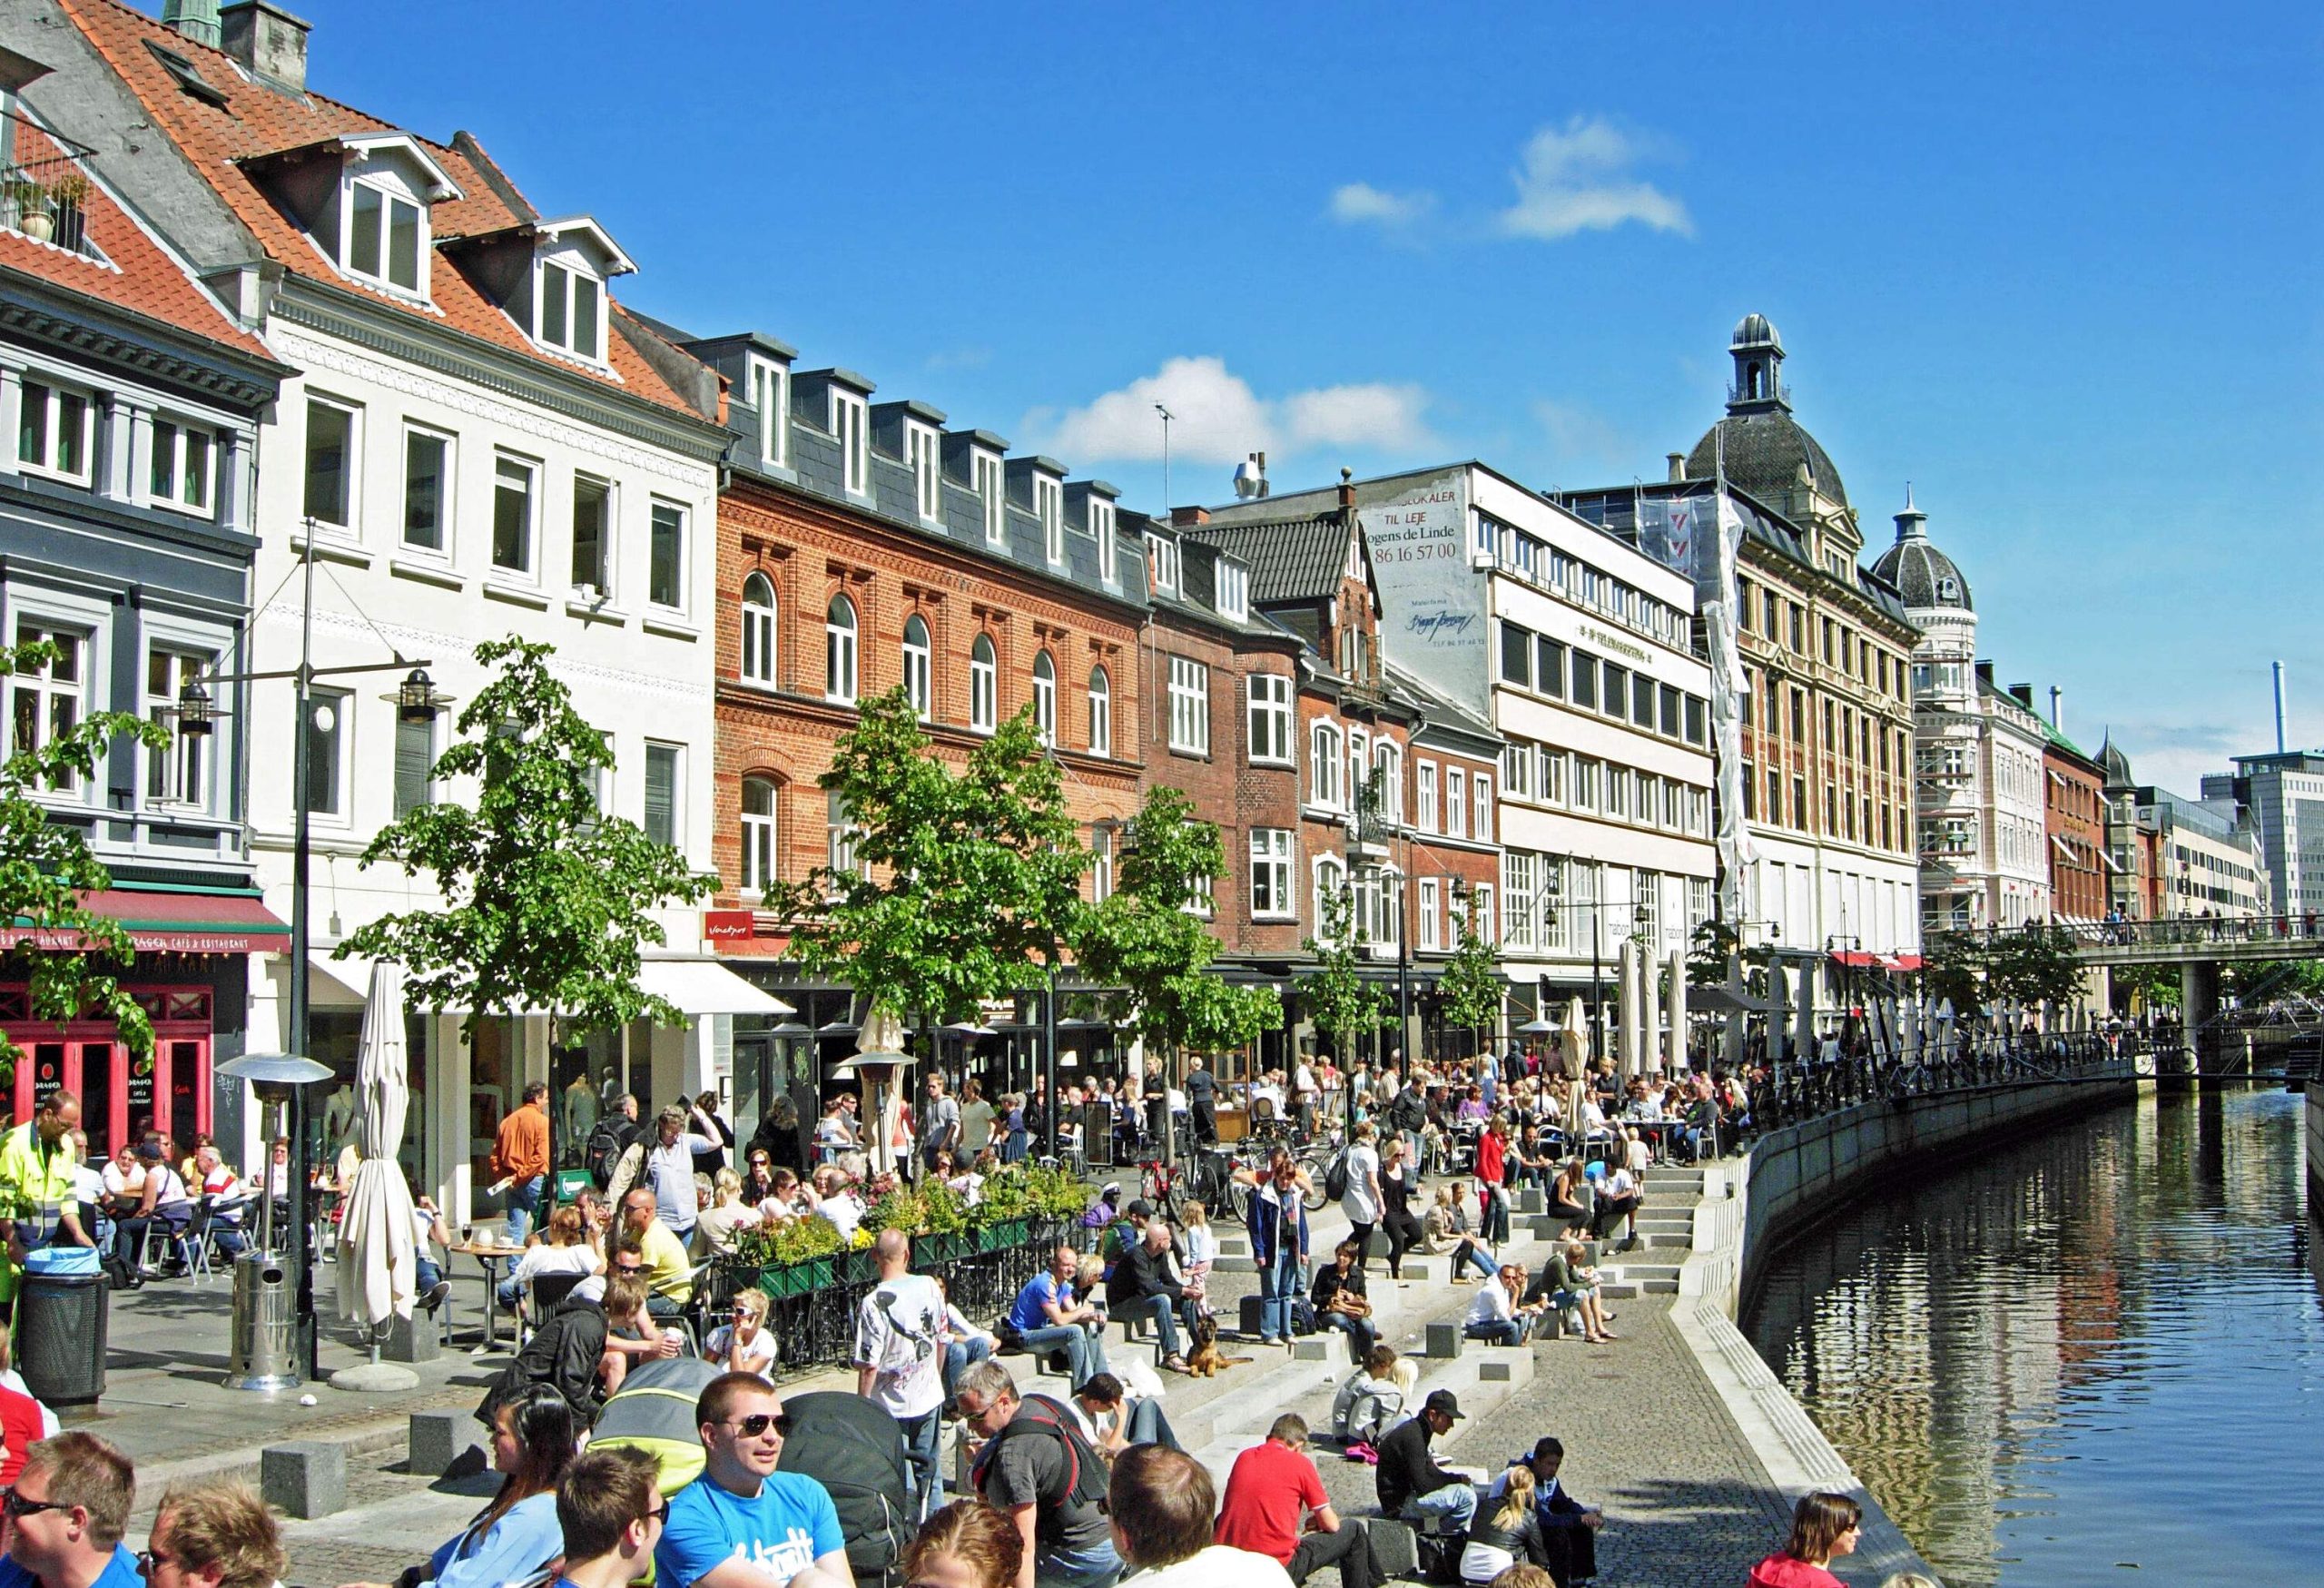 A crowded canal-side boulevard lined with European-style architecture.